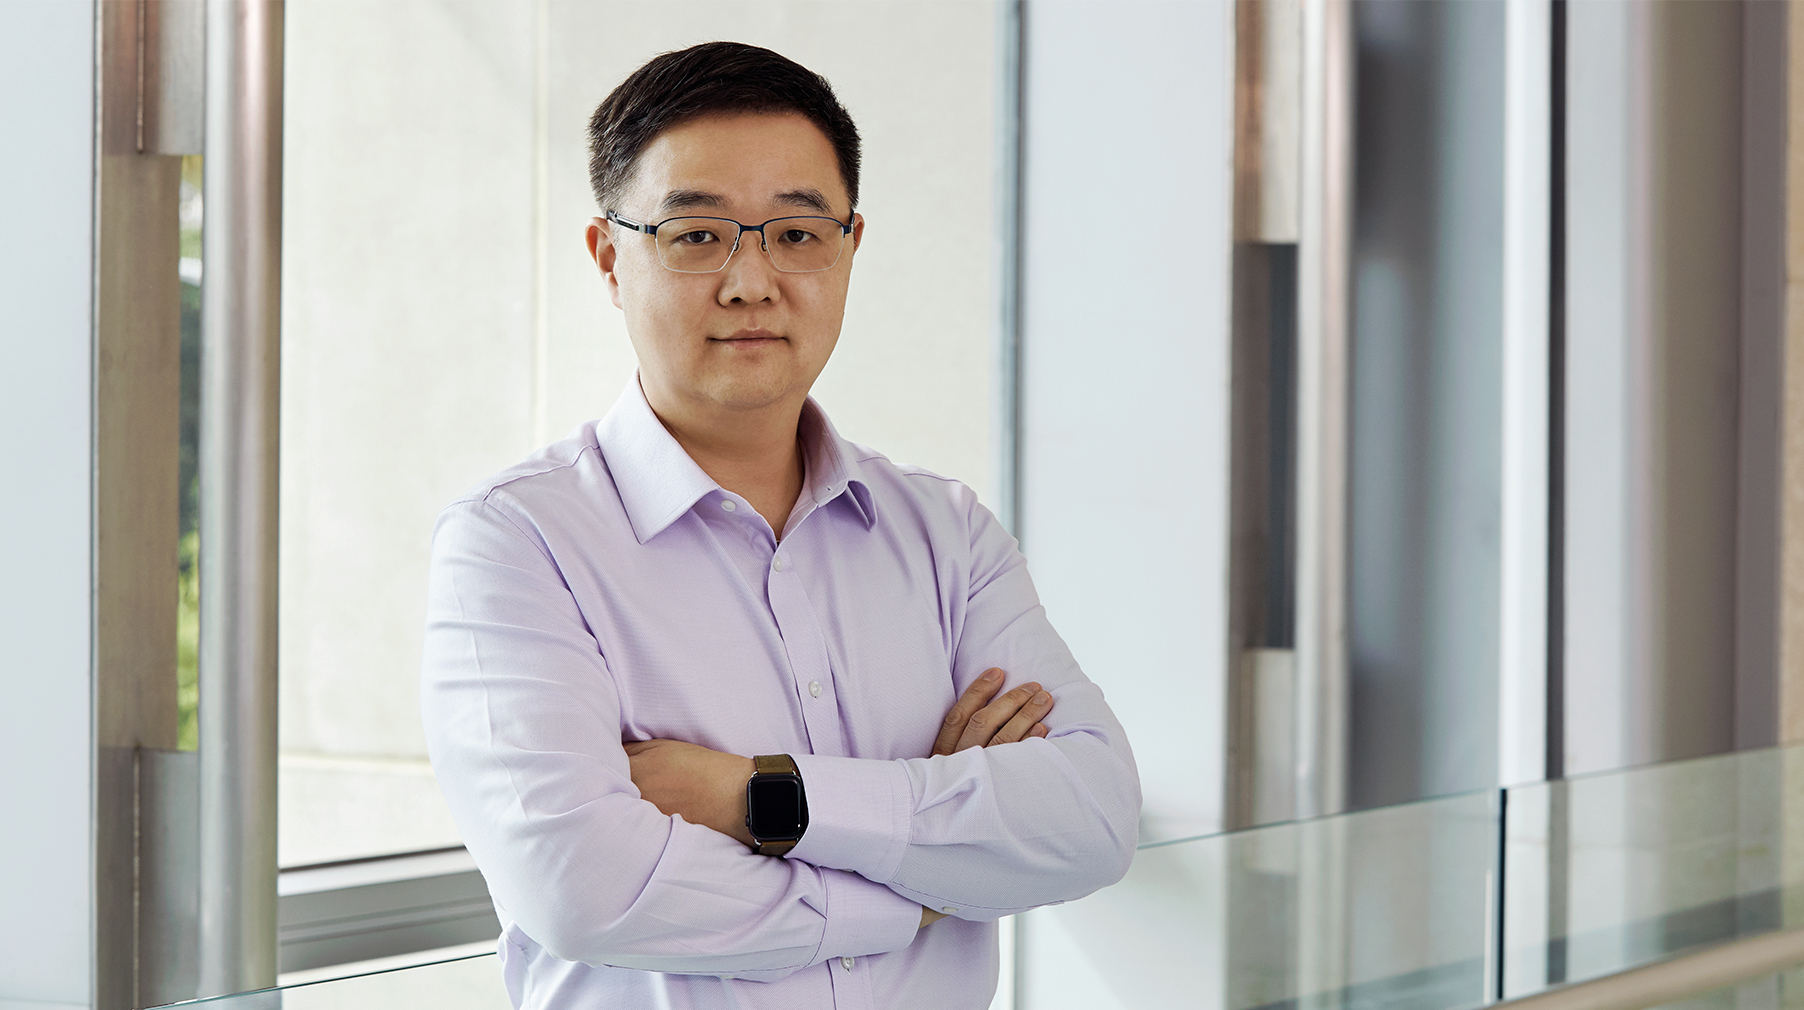 AsiaSat announces appointment of Raymond Chow as Chief Commercial Officer